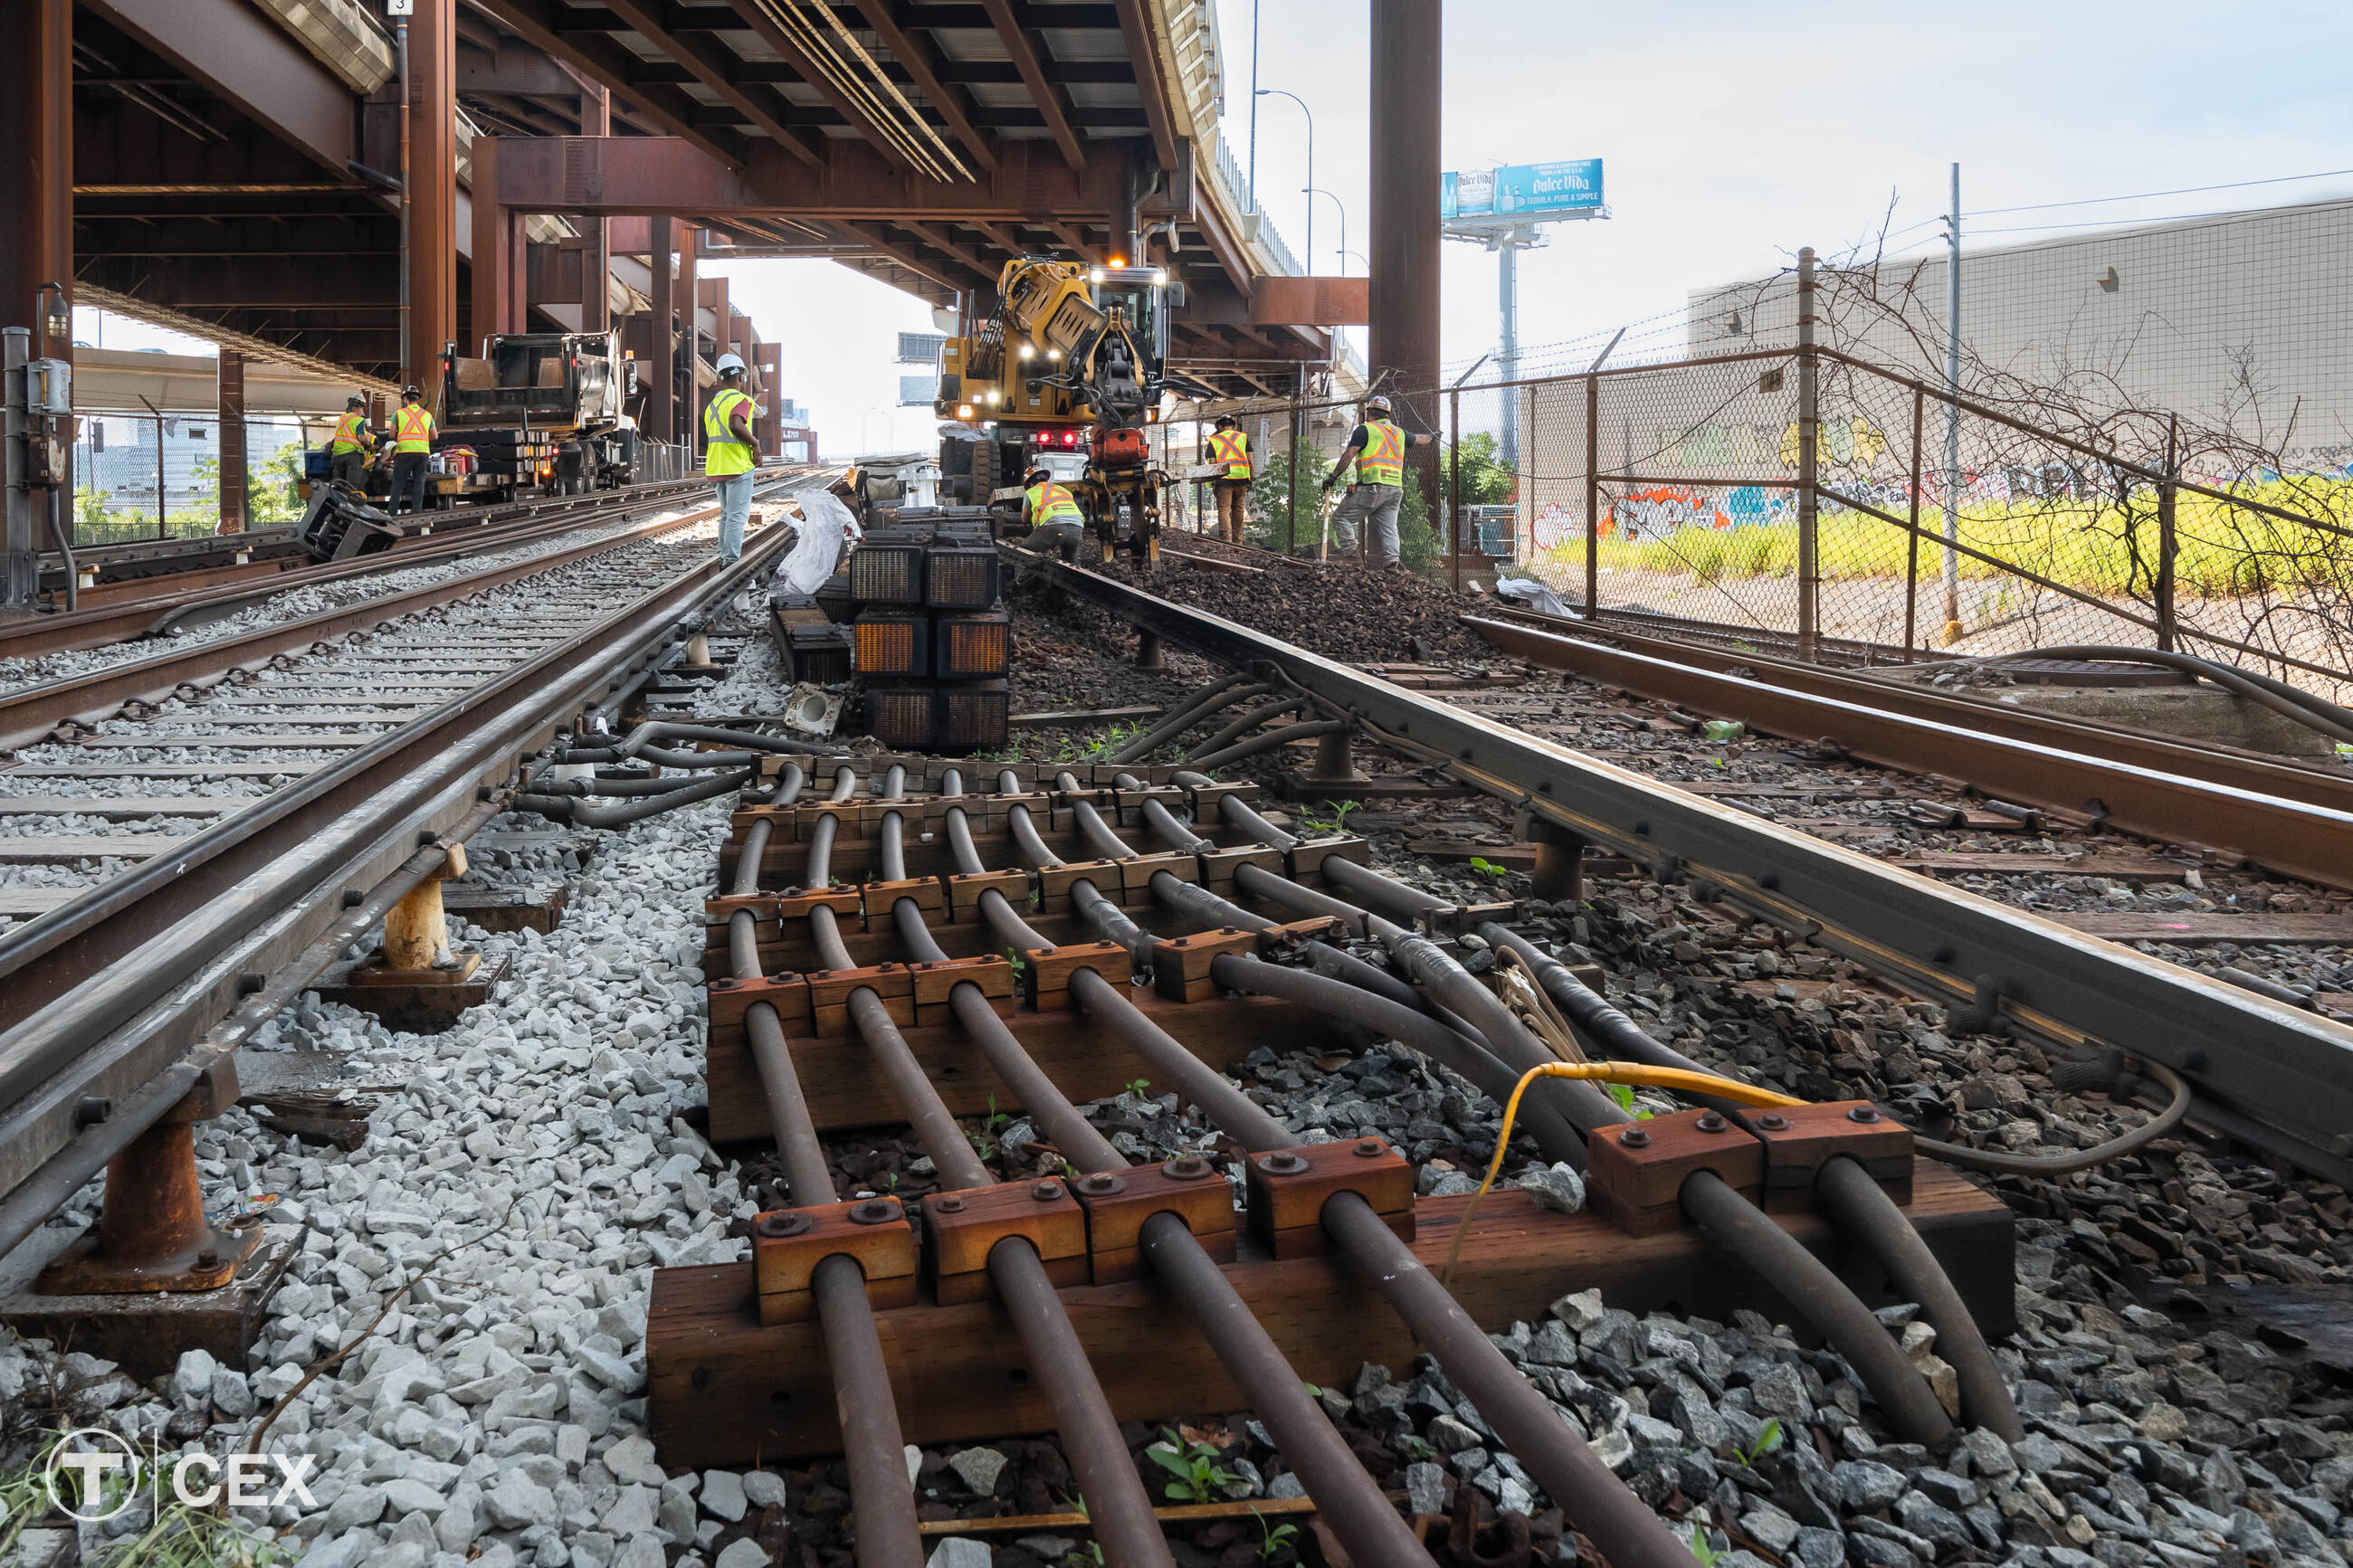 Work included tamping thousands of feet of track along the Orange Line. Complimentary photo by the MBTA Customer and Employee Experience Department.